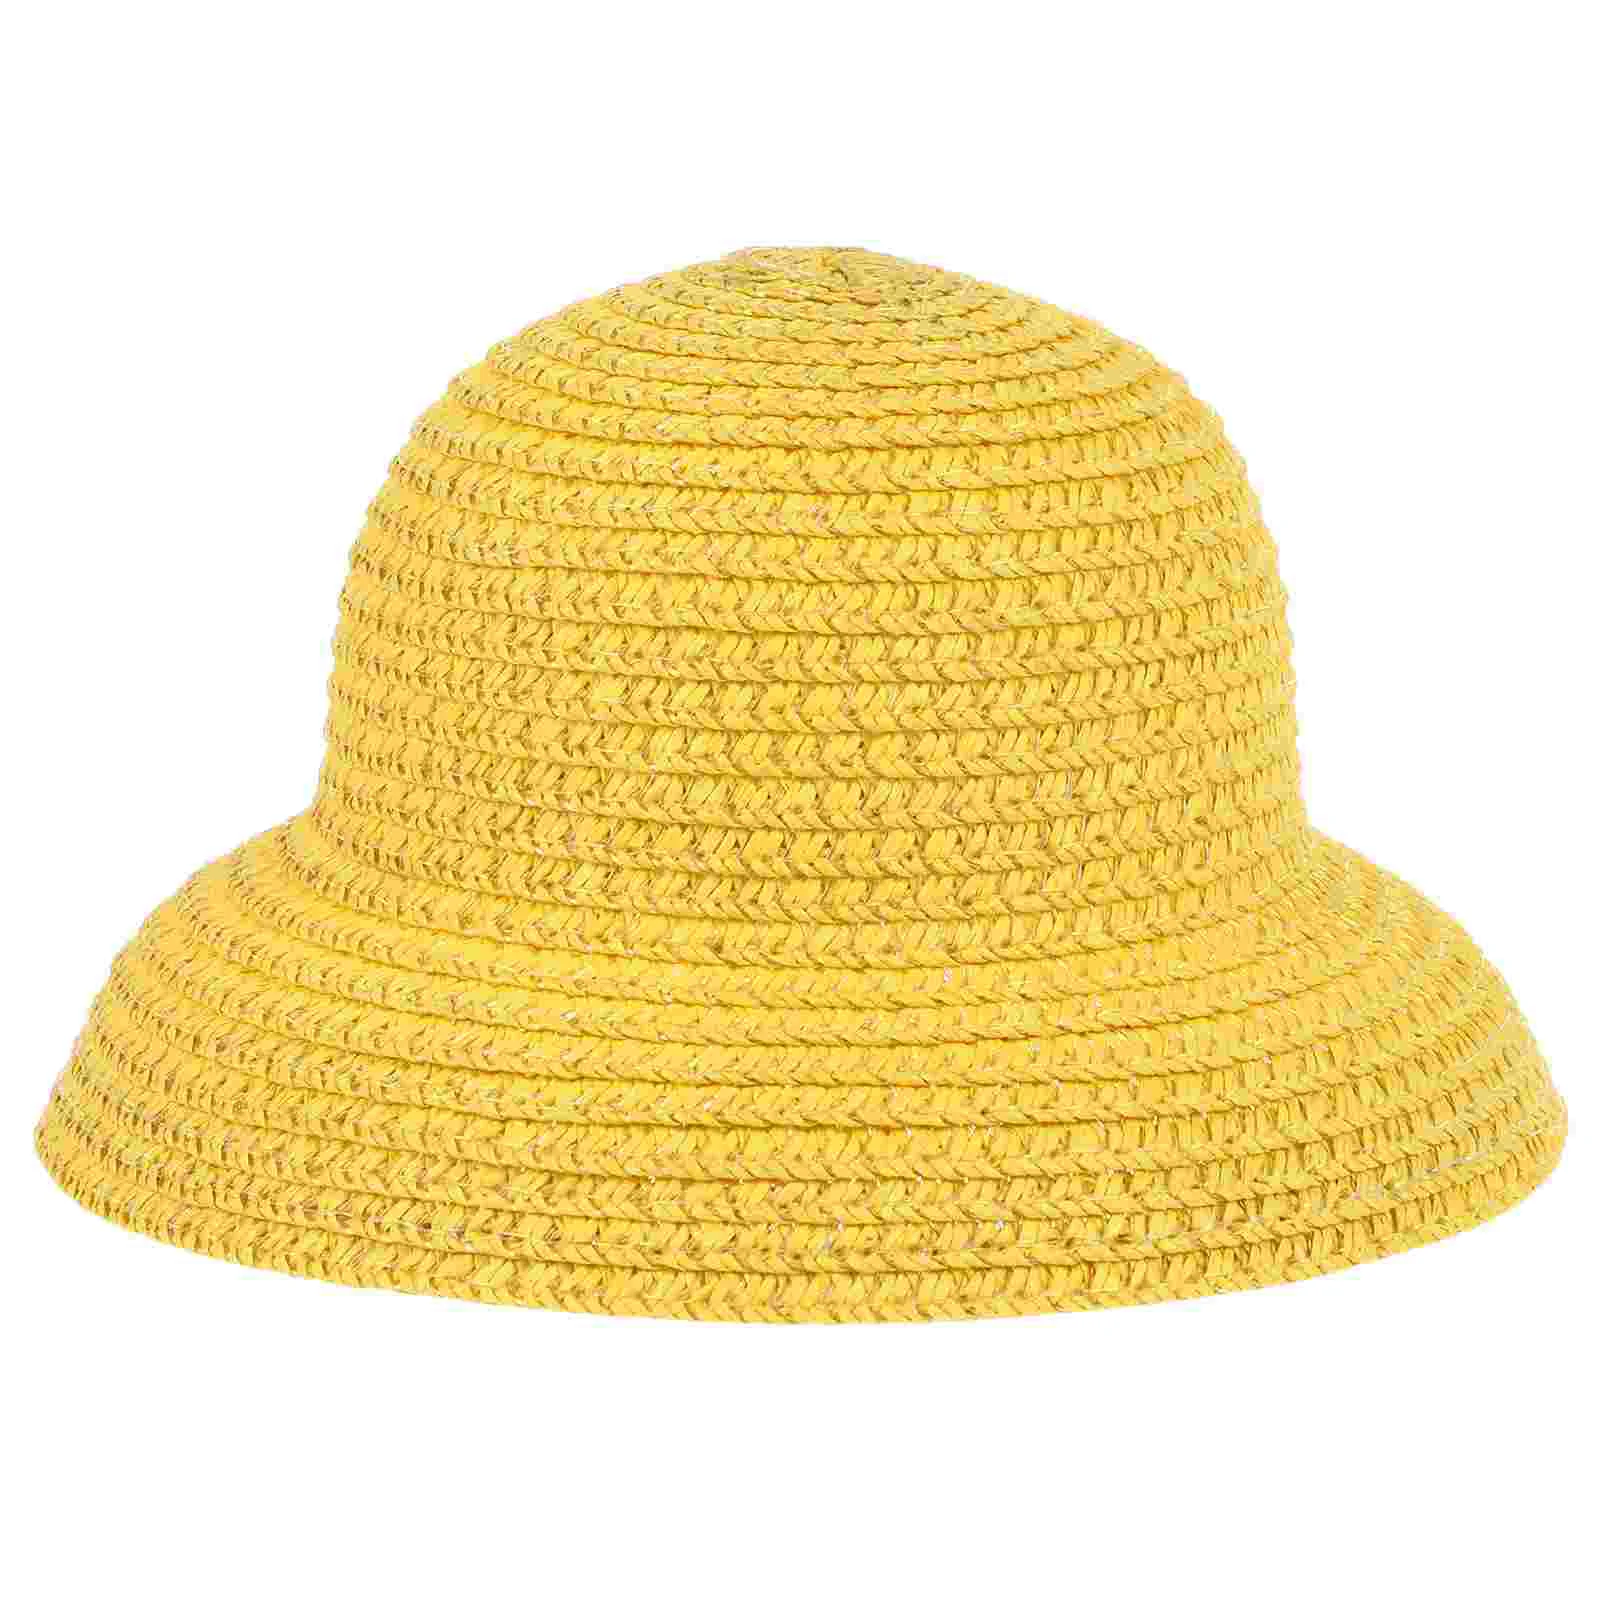 

Straw Hat Hand-knitted Mini Hats Decor Knitting Costume Accessories Imitation House Crafts Miniature